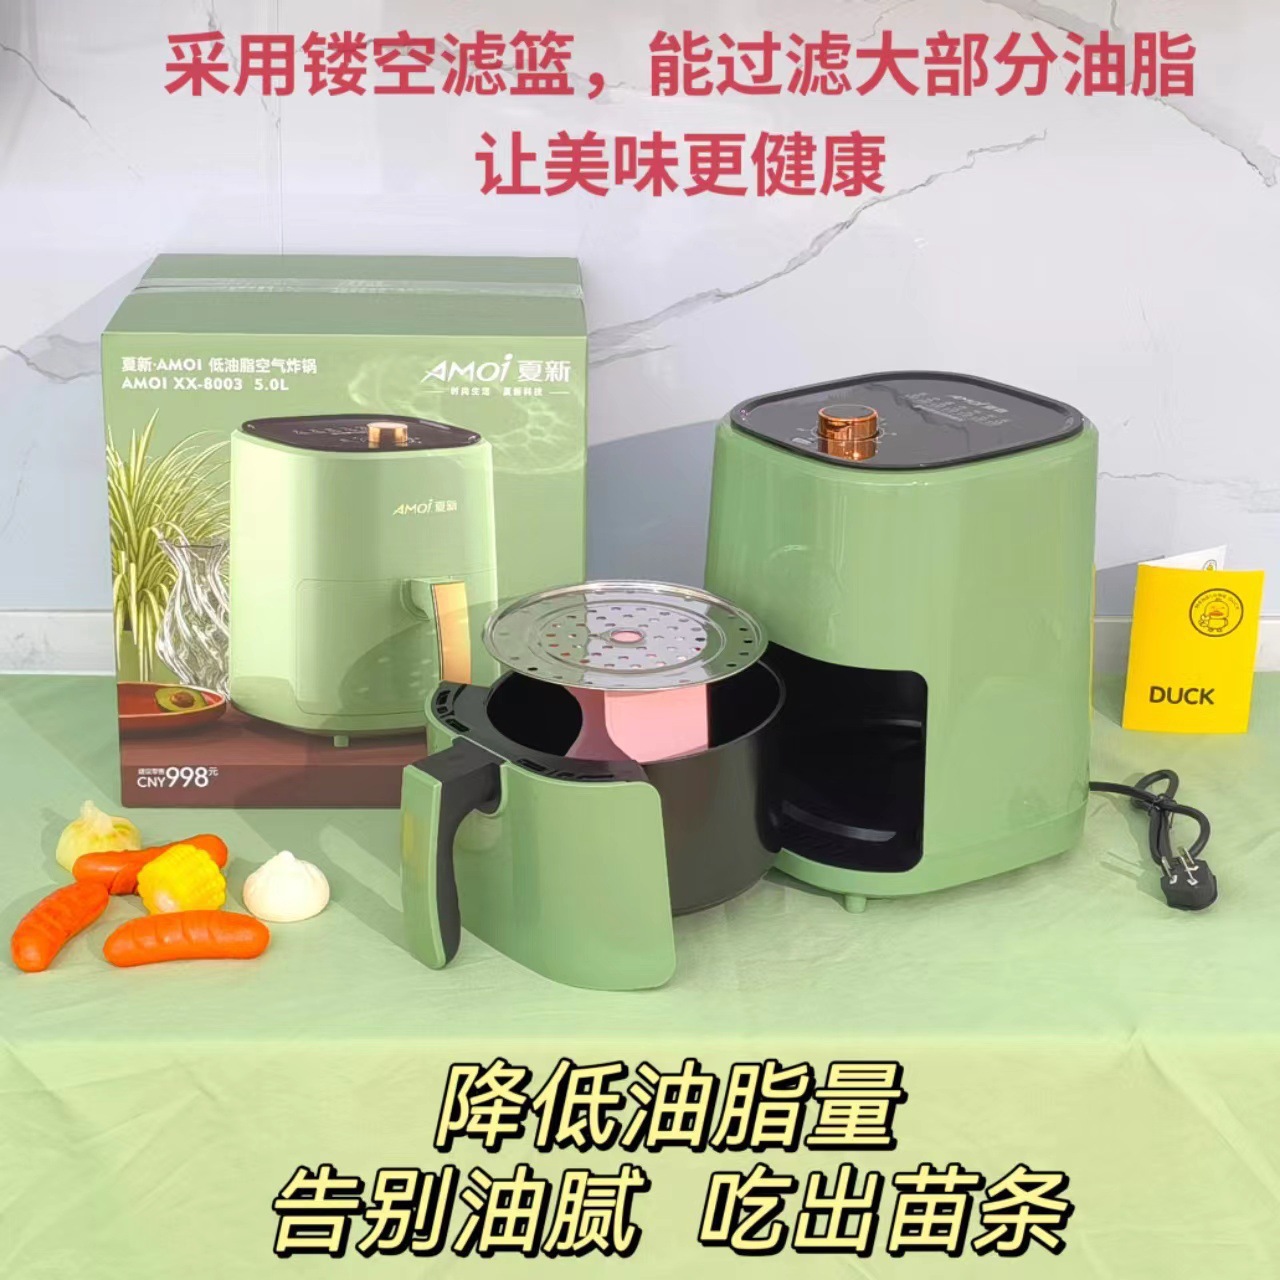 [Activity Gift] Amoi Air Fryer 5 Liters Household Oven Multi-Function Deep Frying Pan Microwave Oven Barbecue